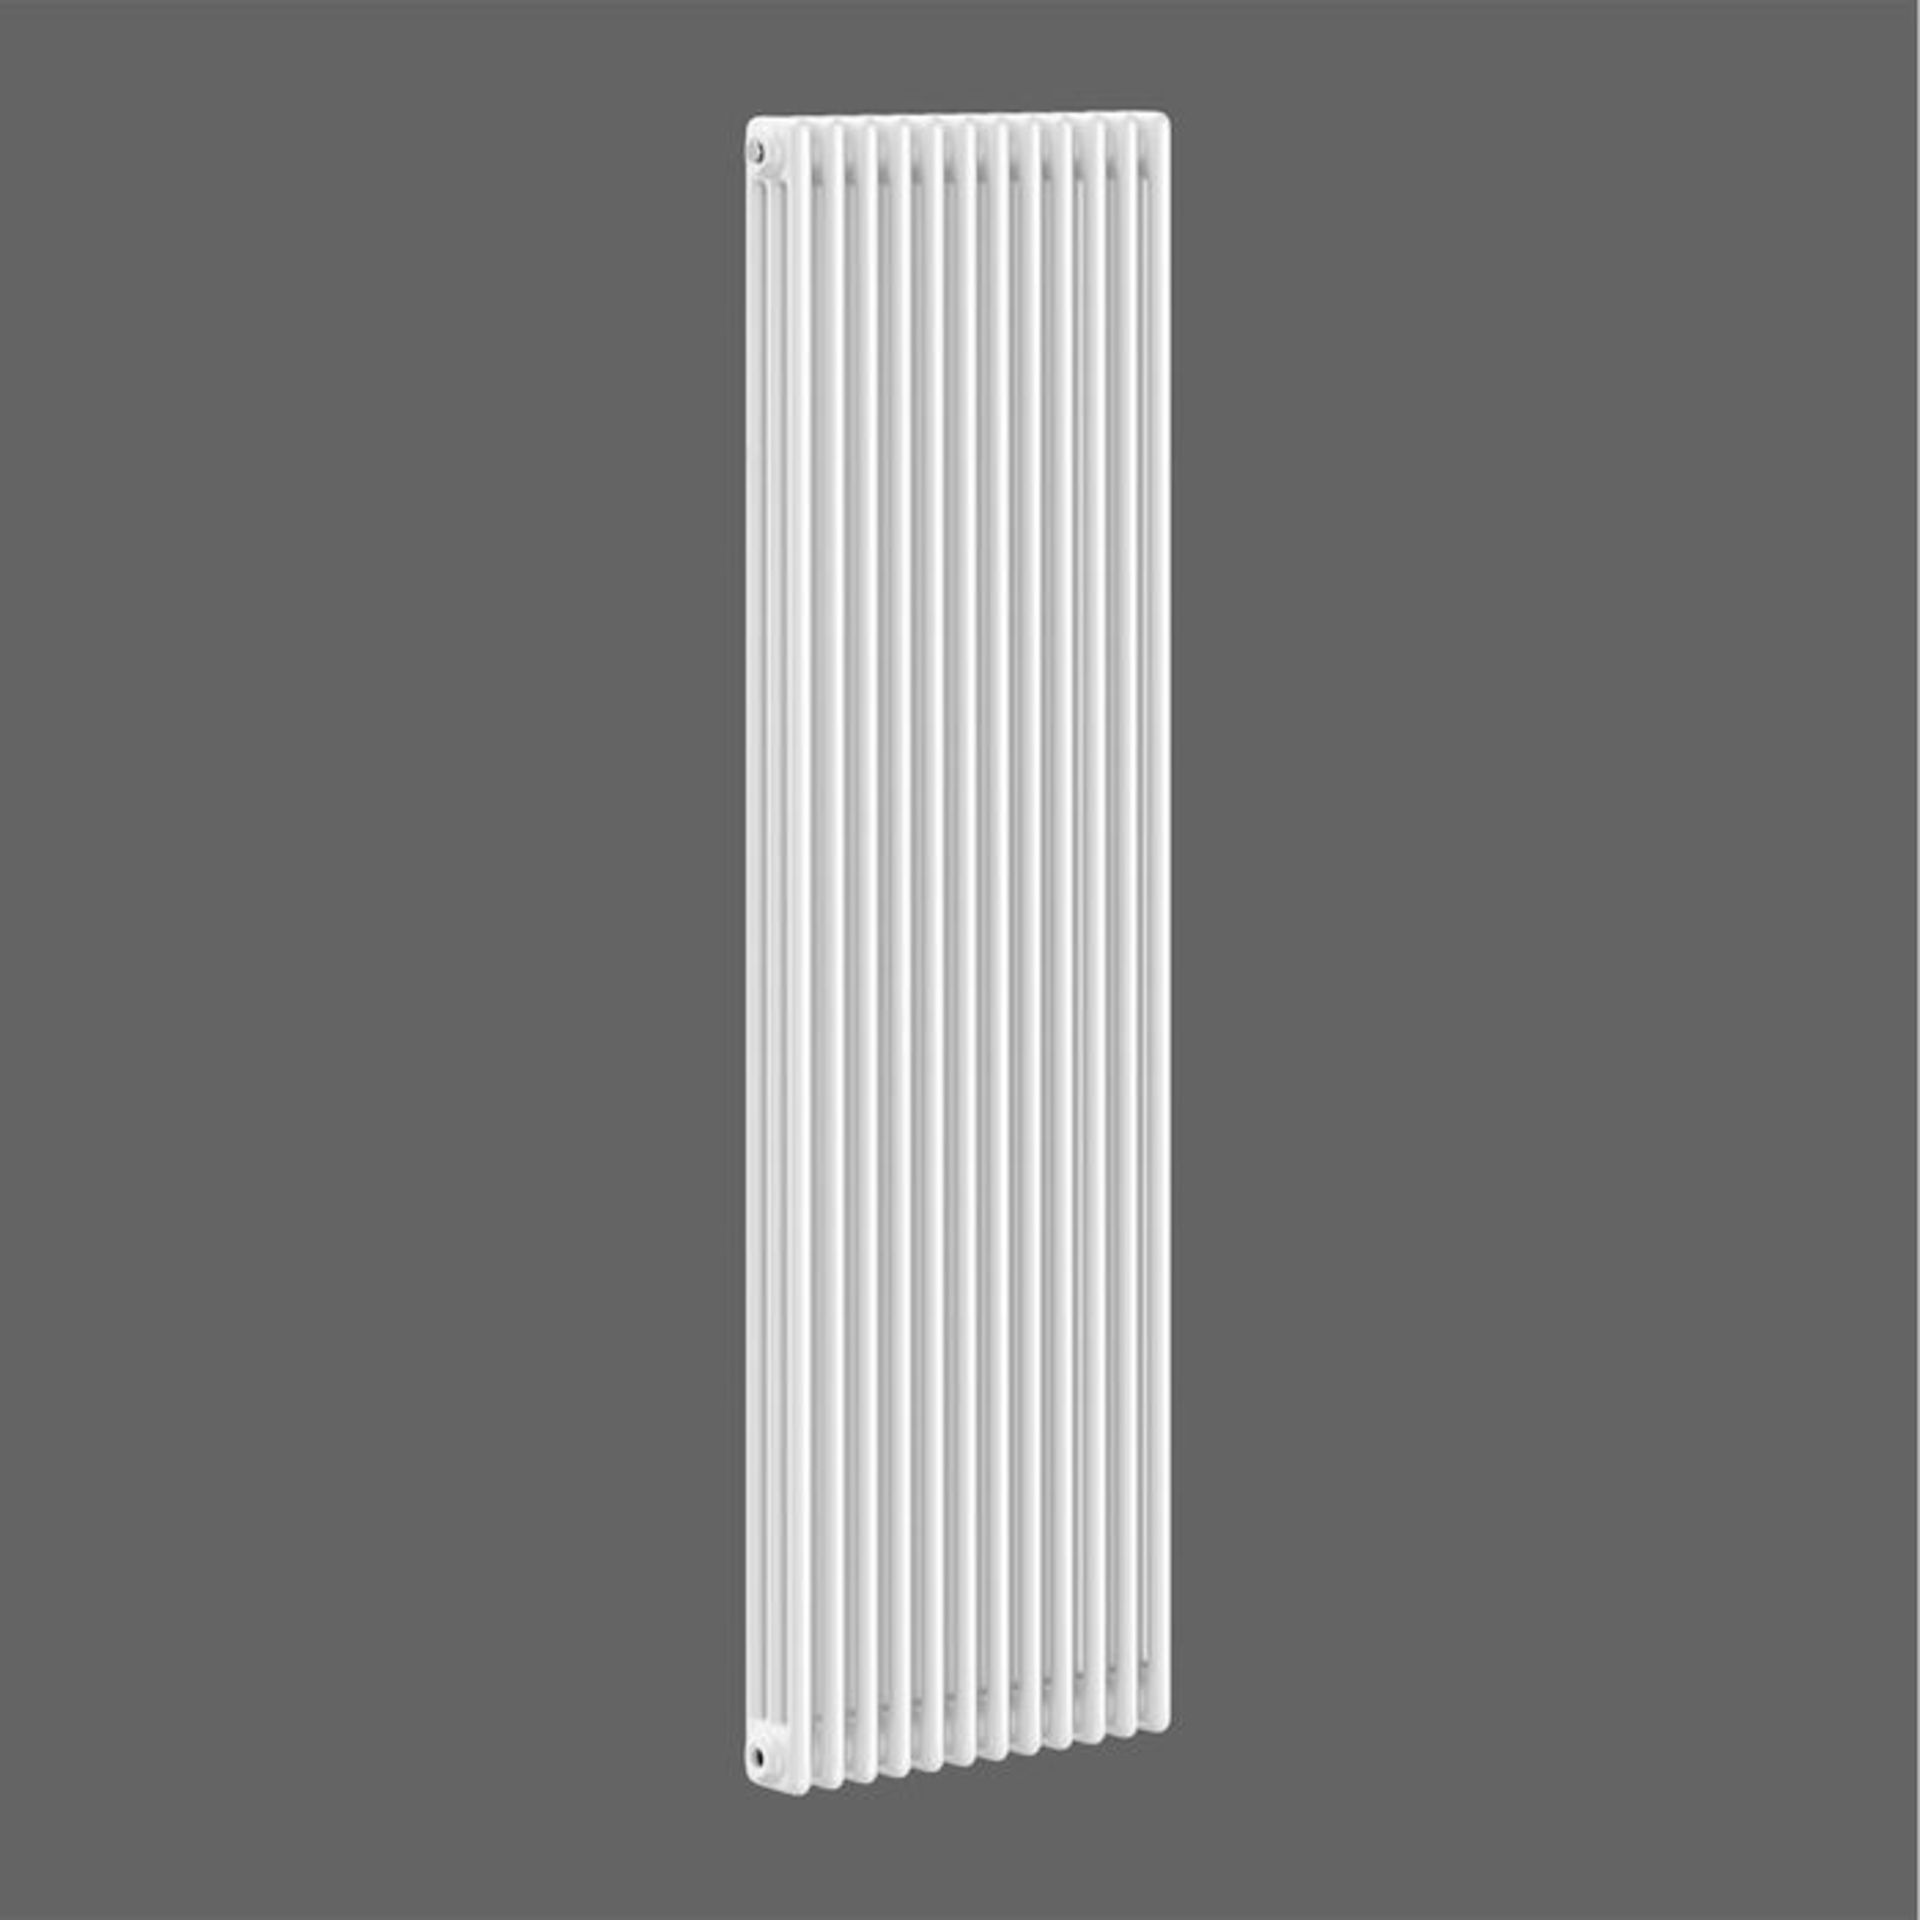 (L72) 1800x554mm White Triple Panel Vertical ColosseumTraditional Radiator. RRP £599.99. Low - Image 3 of 3